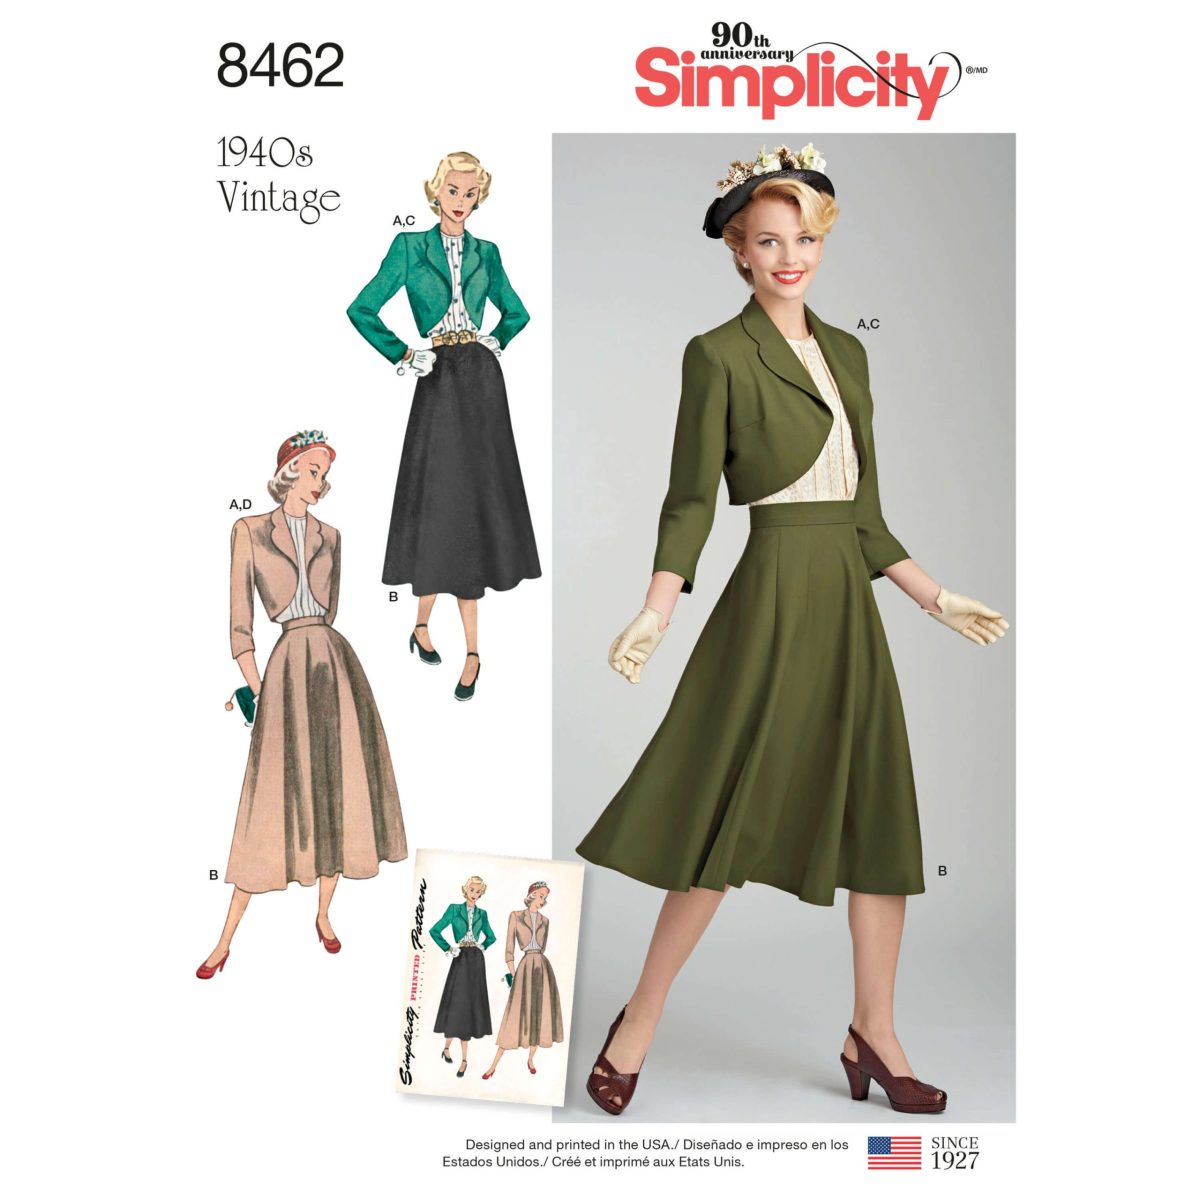 Simplicity Sewing Pattern 8462 Misses' Vintage Blouse, Skirt and Lined Bolero